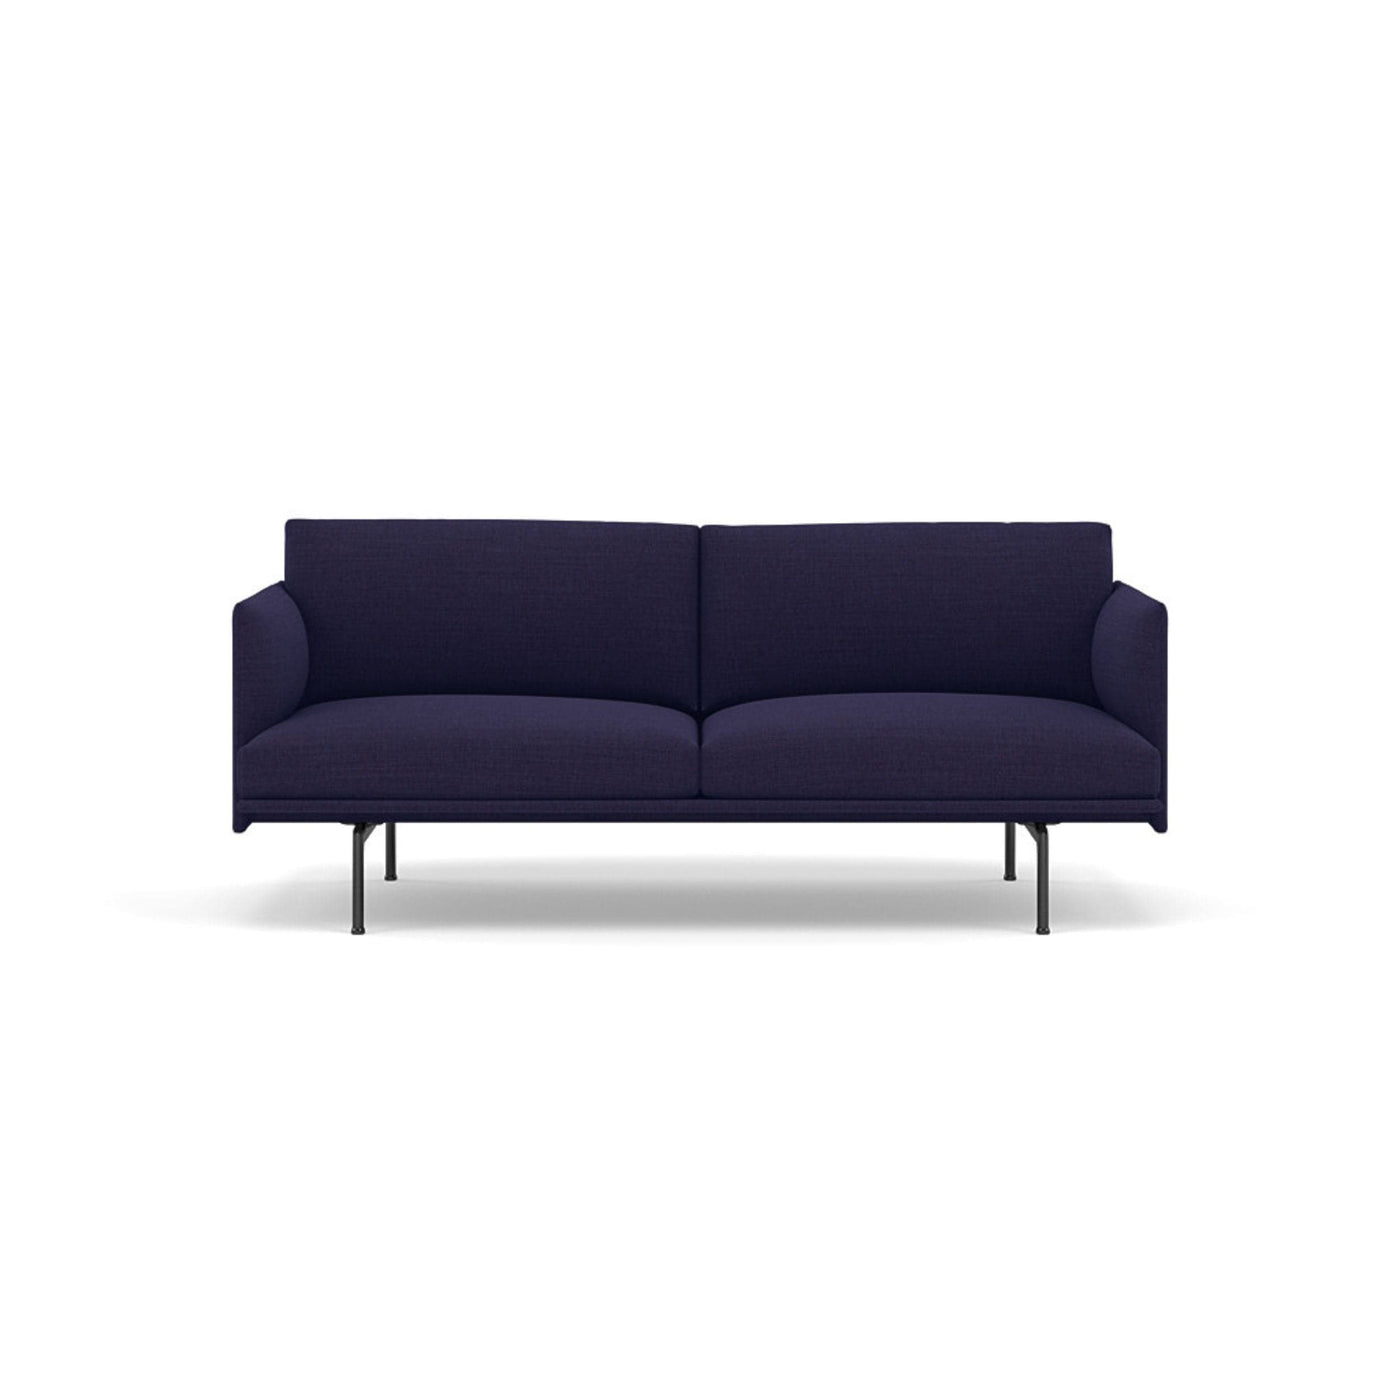 Muuto Outline Studio Sofa 170 in canvas 684 and black legs. Made to order from someday designs. #colour_canvas-684-blue